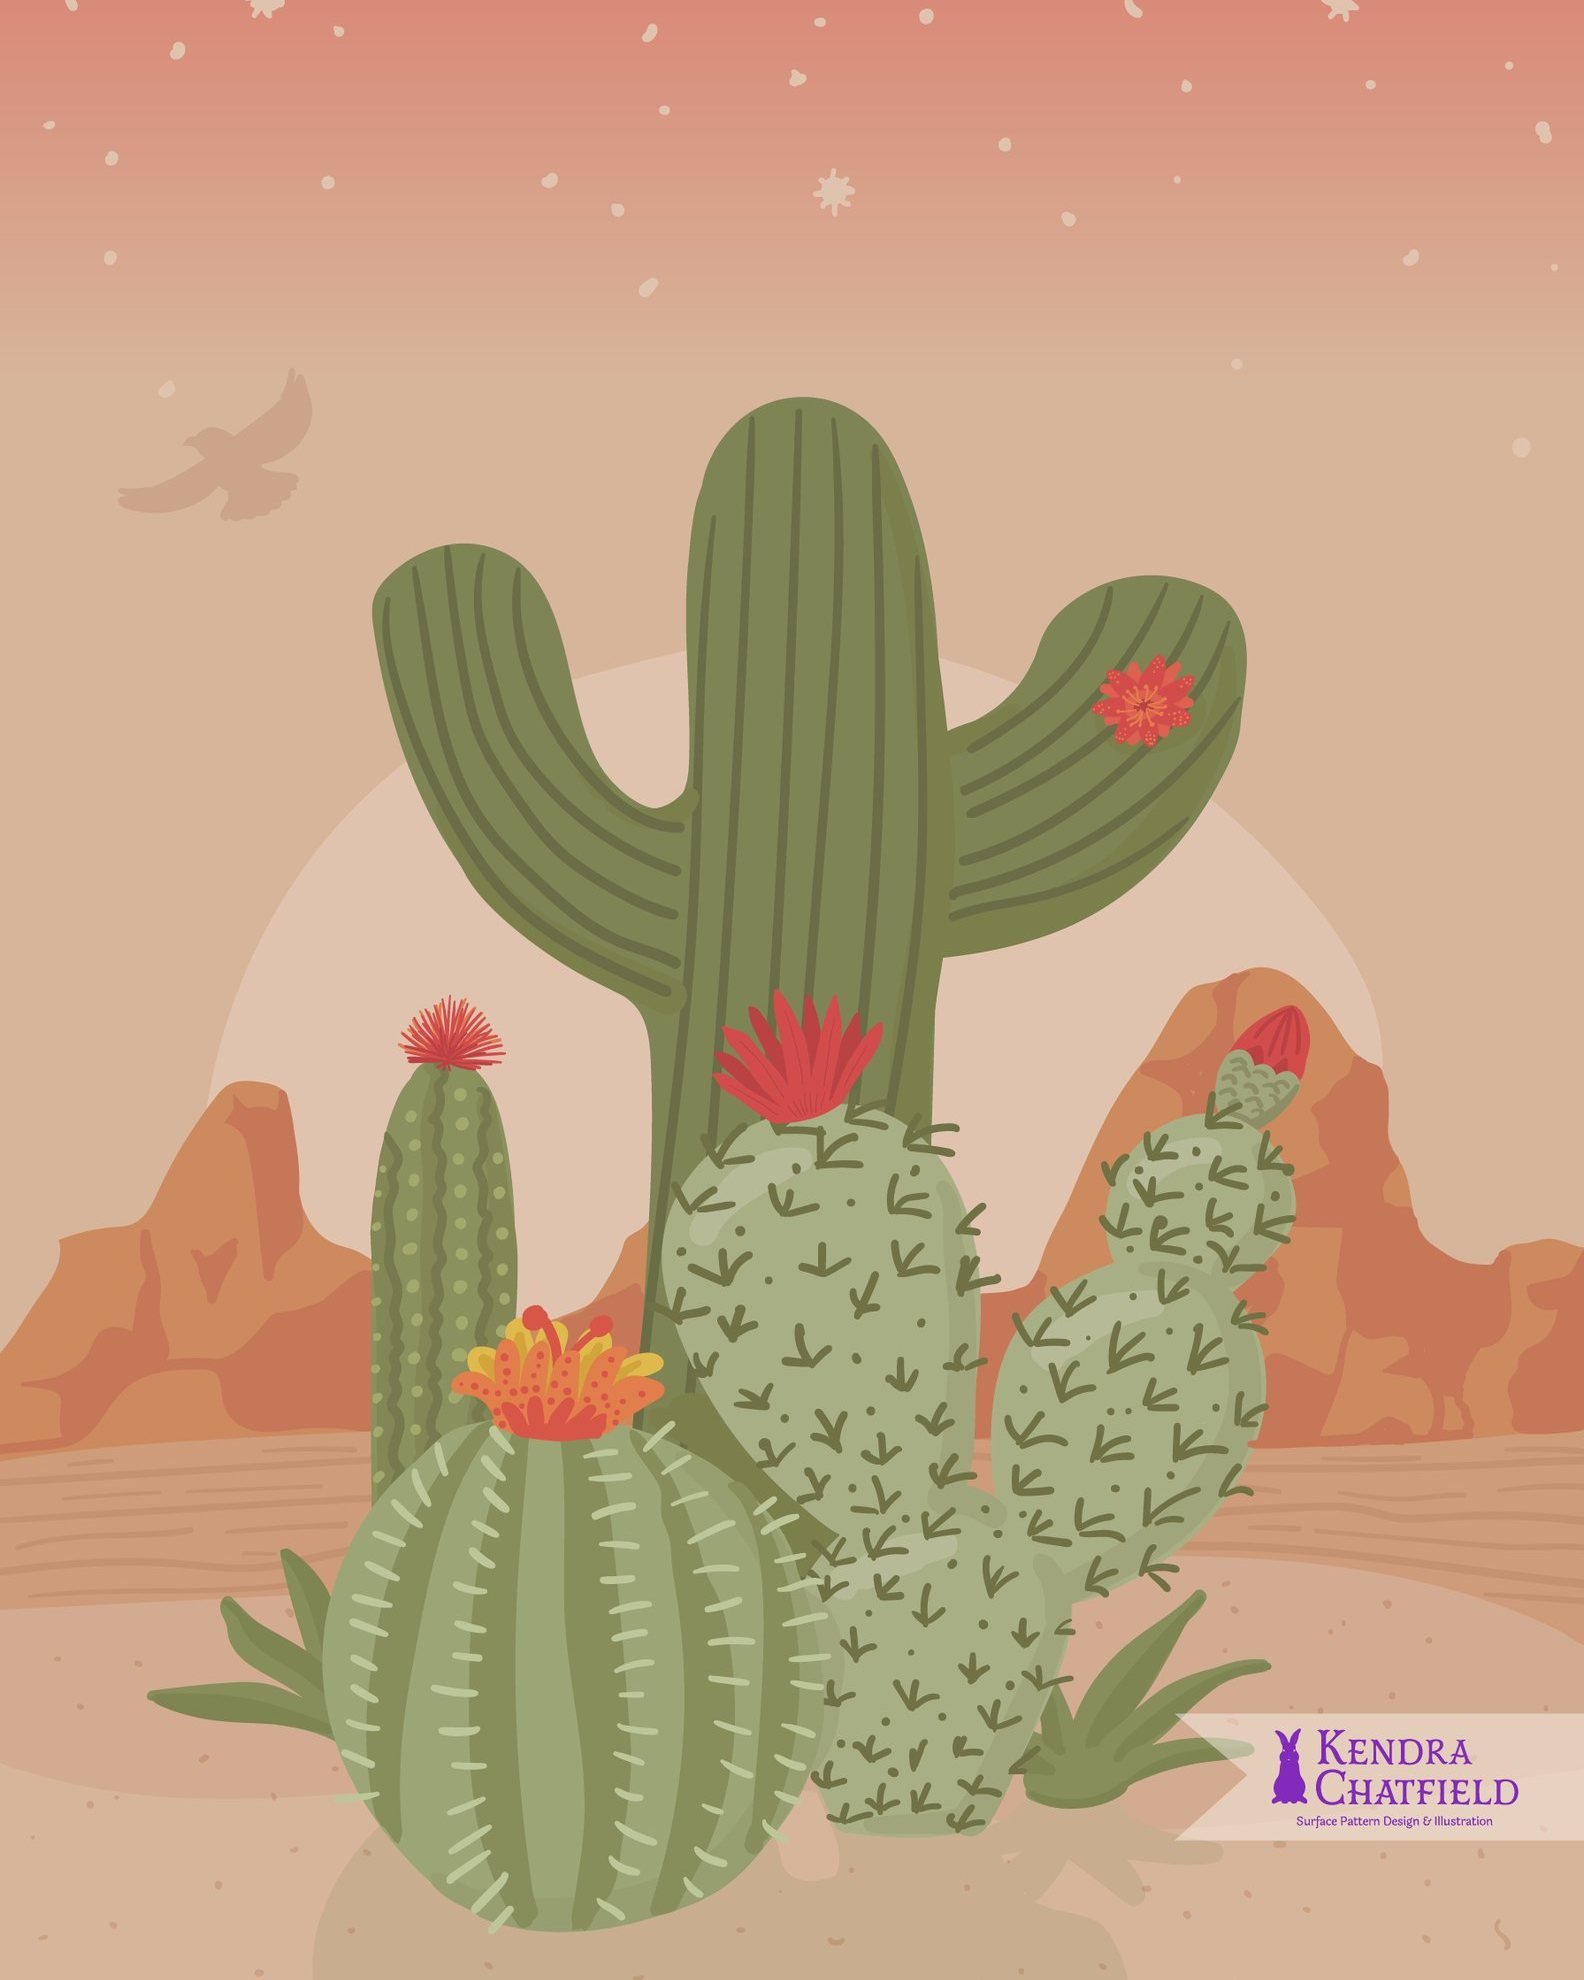 I don't typically do desert/western related contest, but for some reason I was drawn to create a collection that feels very desert-y to me. Here is an illustration from the collection, and I will be posting more soon!

#desert #desertart #boho #illus